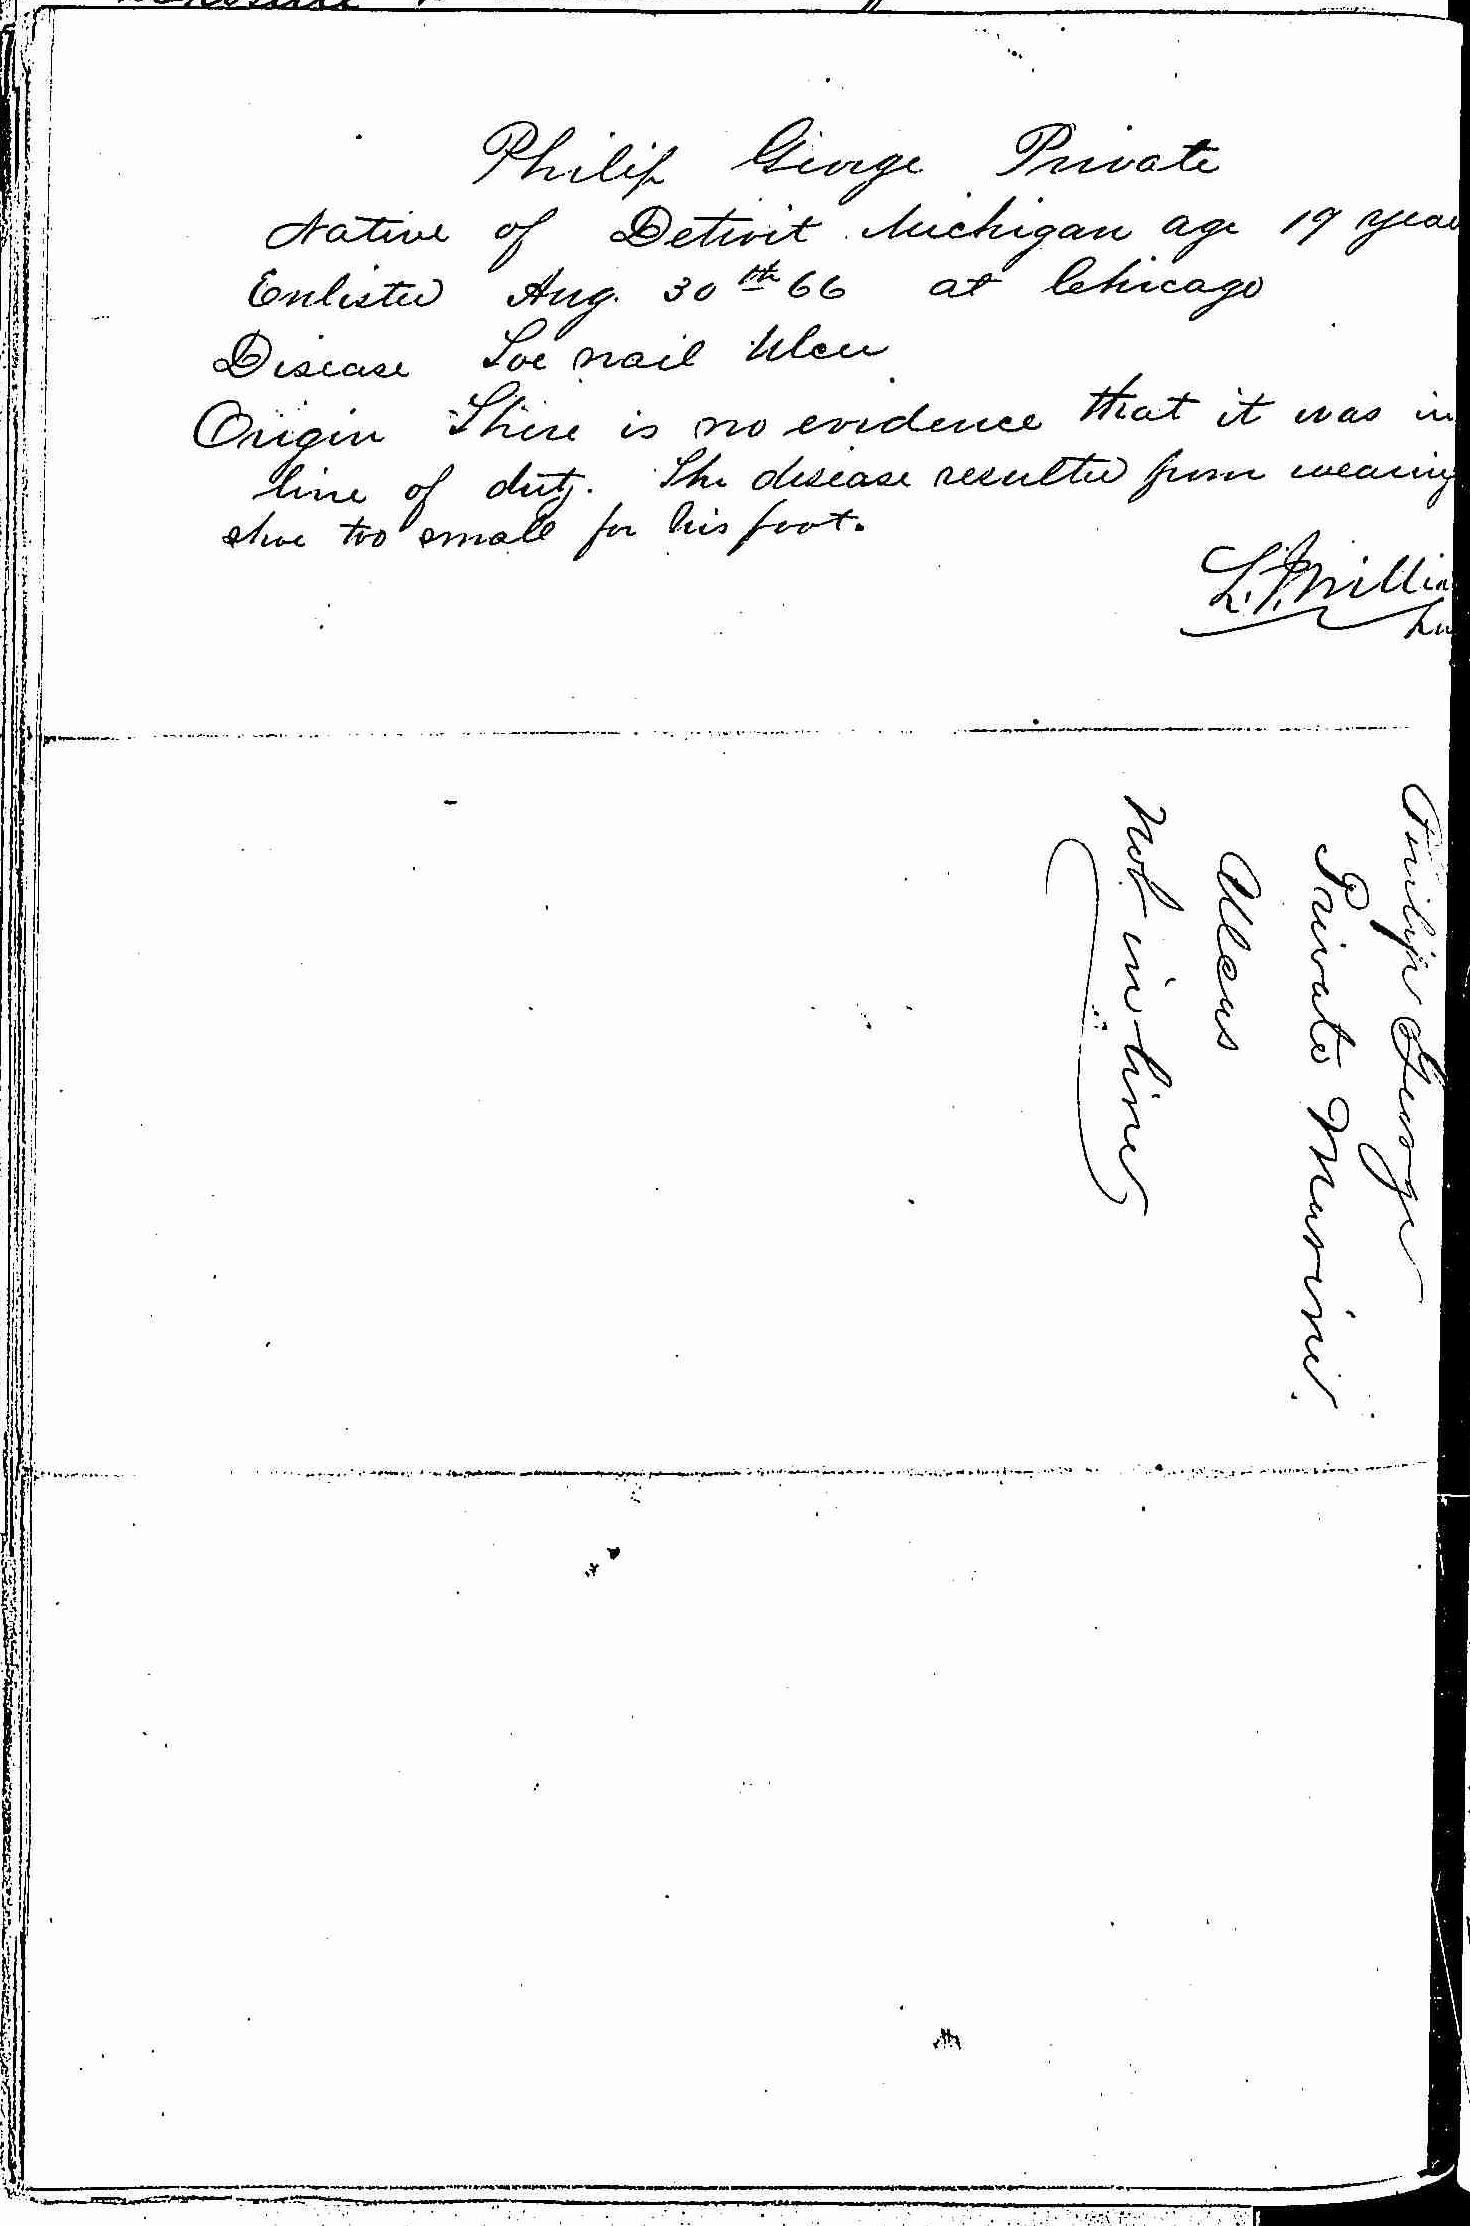 Entry for Philip George (second admission page 2 of 2) in the log Hospital Tickets and Case Papers - Naval Hospital - Washington, D.C. - 1866-68